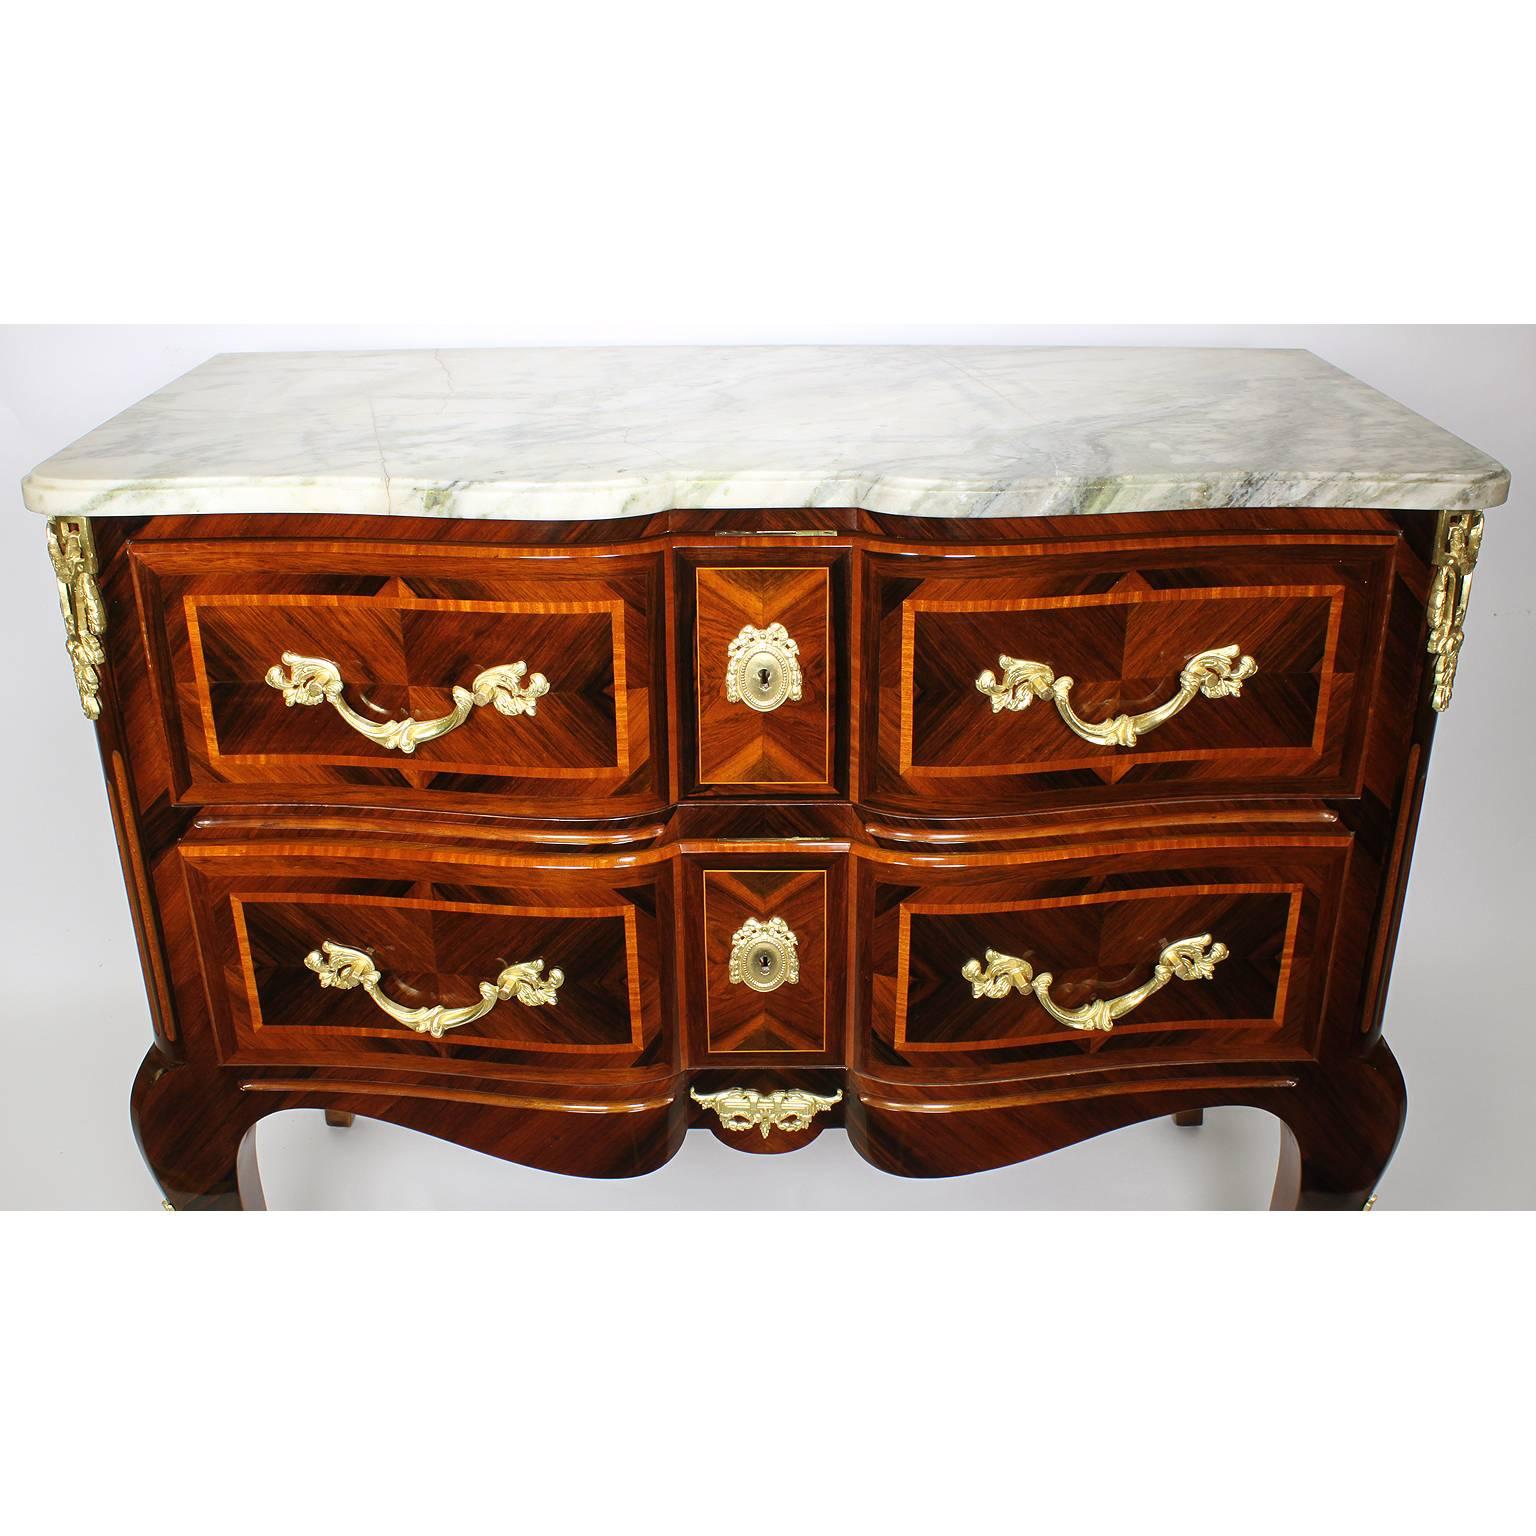 French 19th Century Regency Style Kingwood and Tulipwood and Ormolu Mounted Commode For Sale